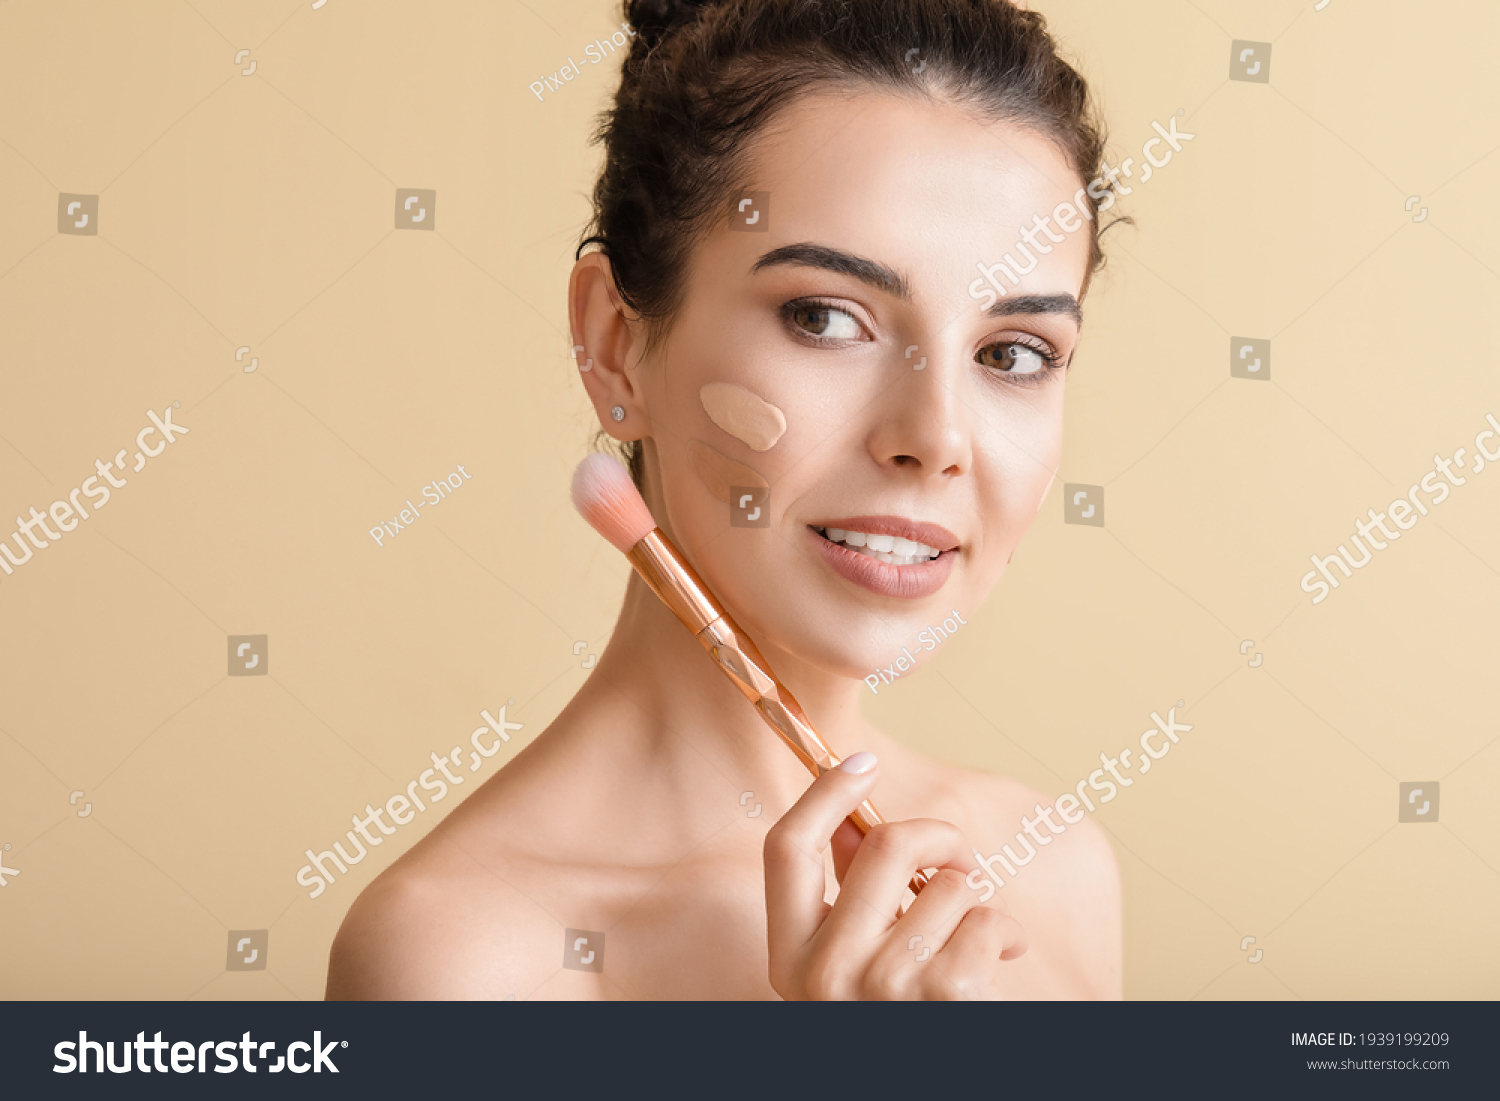 Beautiful young woman with foundation on her face against color background #1939199209